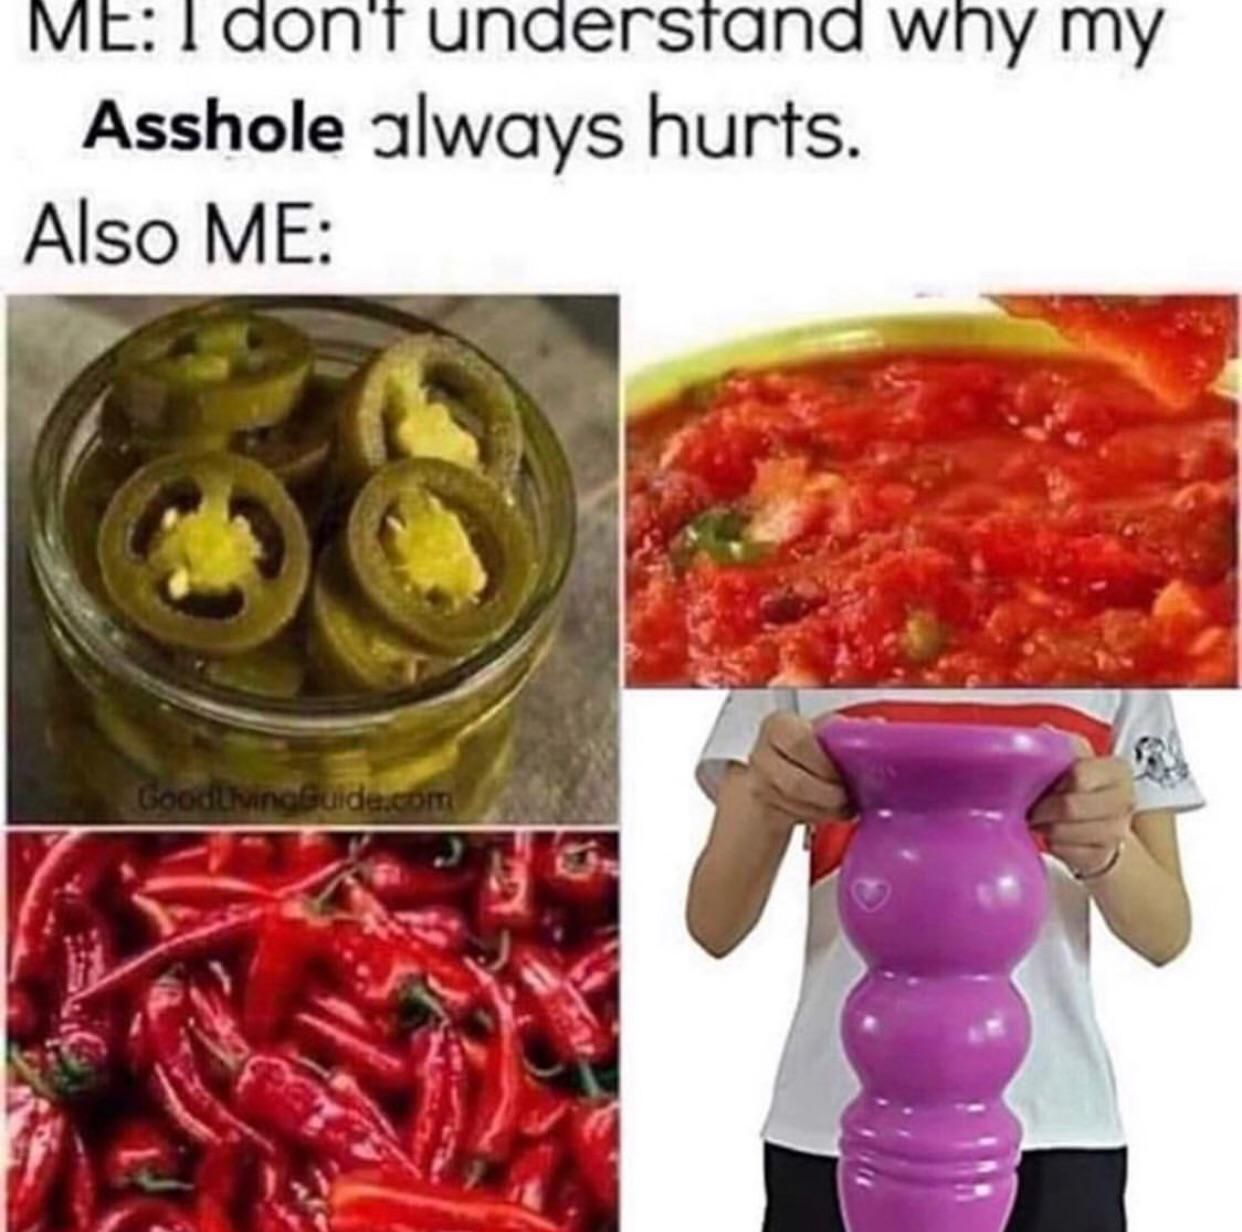 I love me some spicy food